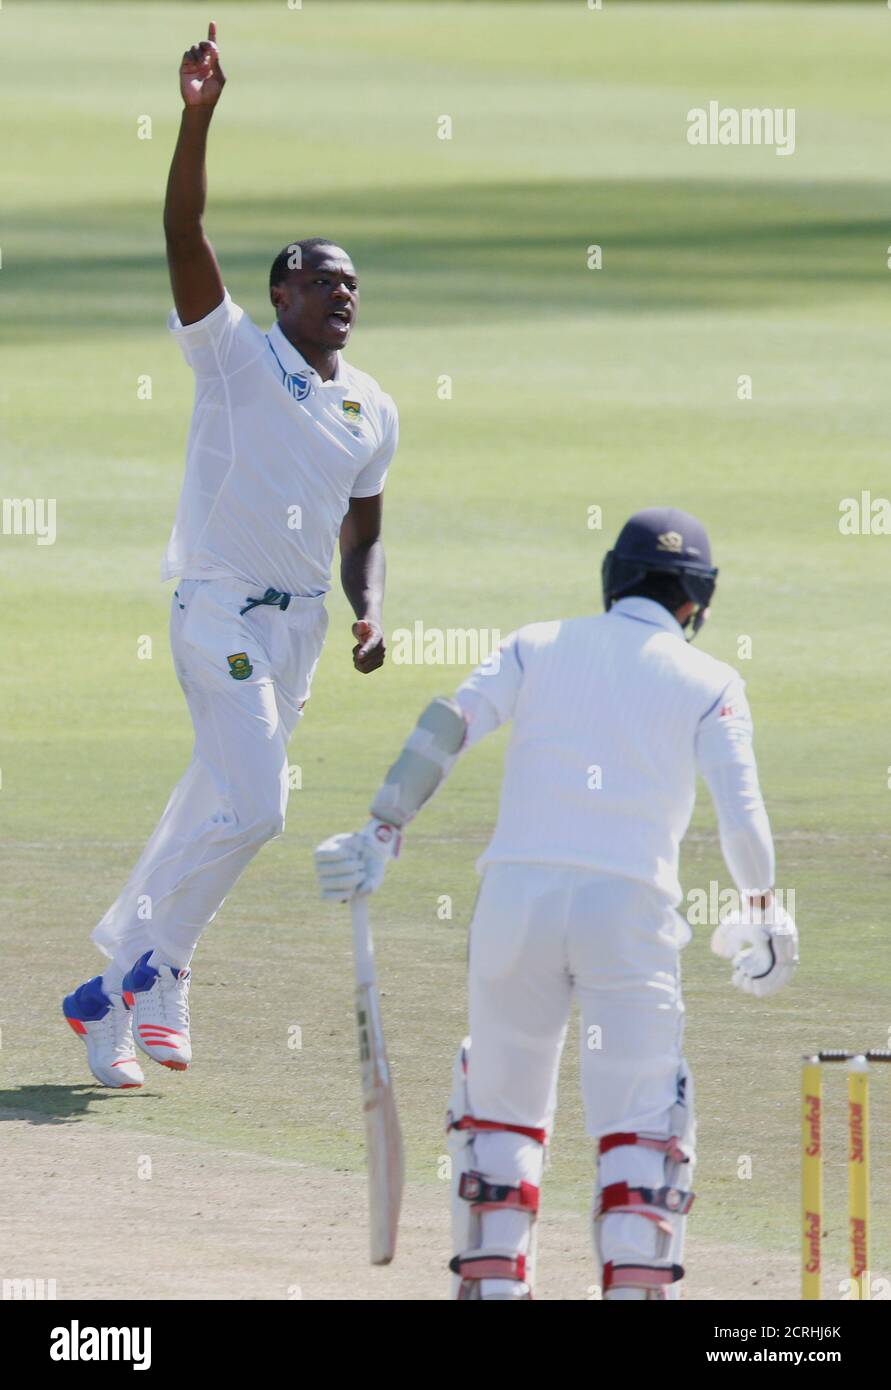 Cricket - Sri Lanka v South Africa - Second Test cricket match - Newlands Stadium, Cape Town, South Africa - 03/01/2017. South Africa's Kagiso Rabada celebrates taking the wicket of Sri Lanka's Dinesh Chandimal. REUTERS/Mike Hutchings Stock Photo